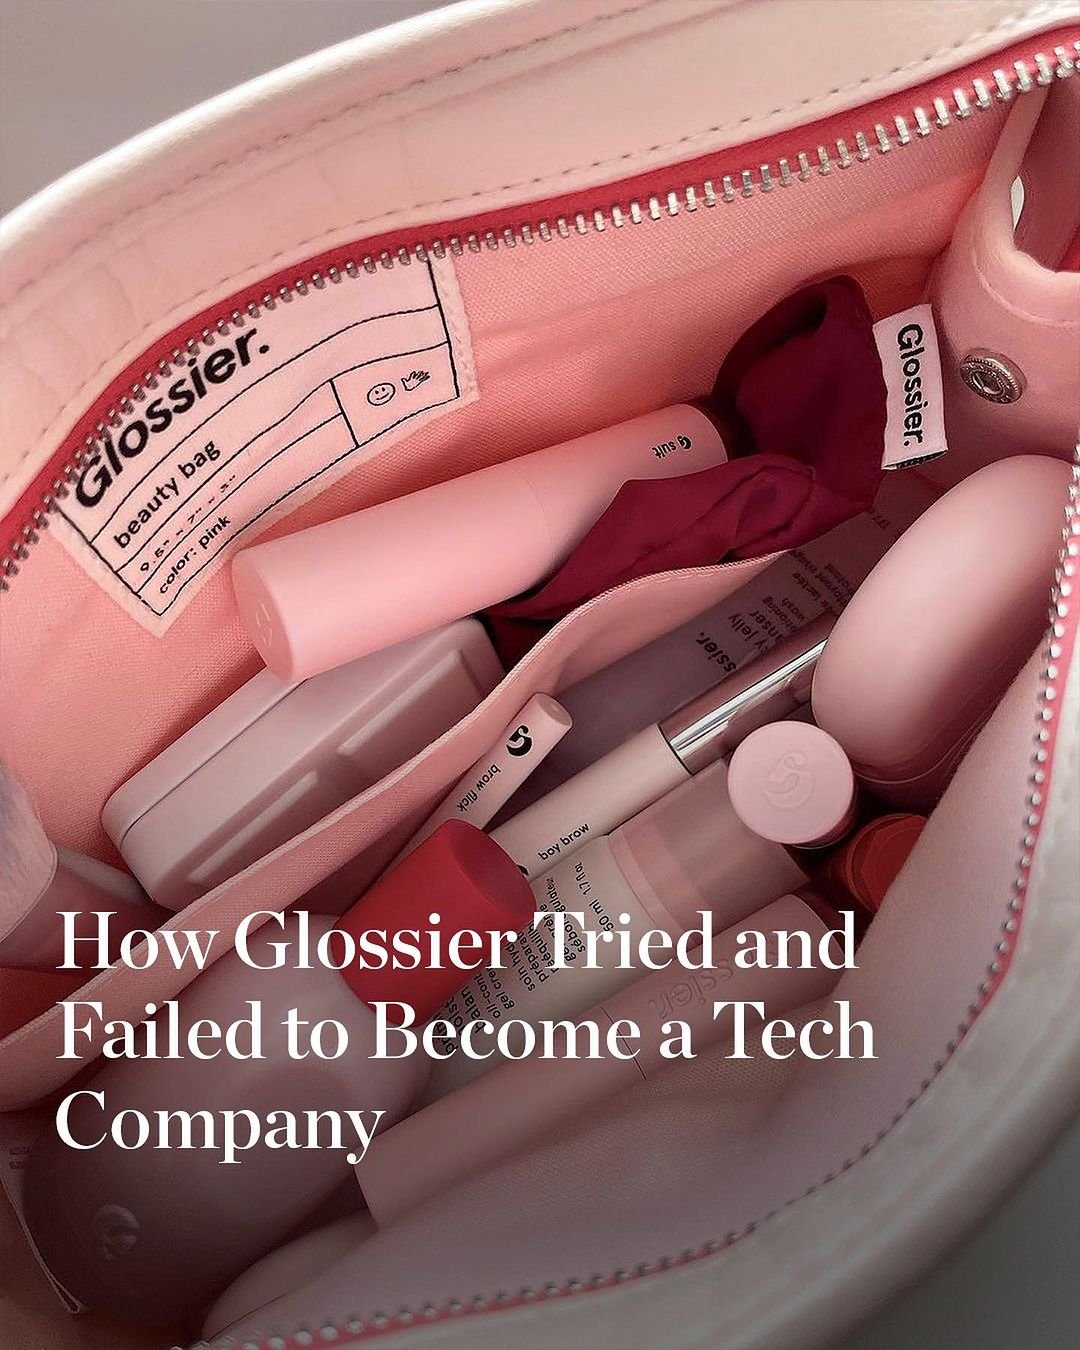 How Glossier Tried and Failed to Become a Tech Company